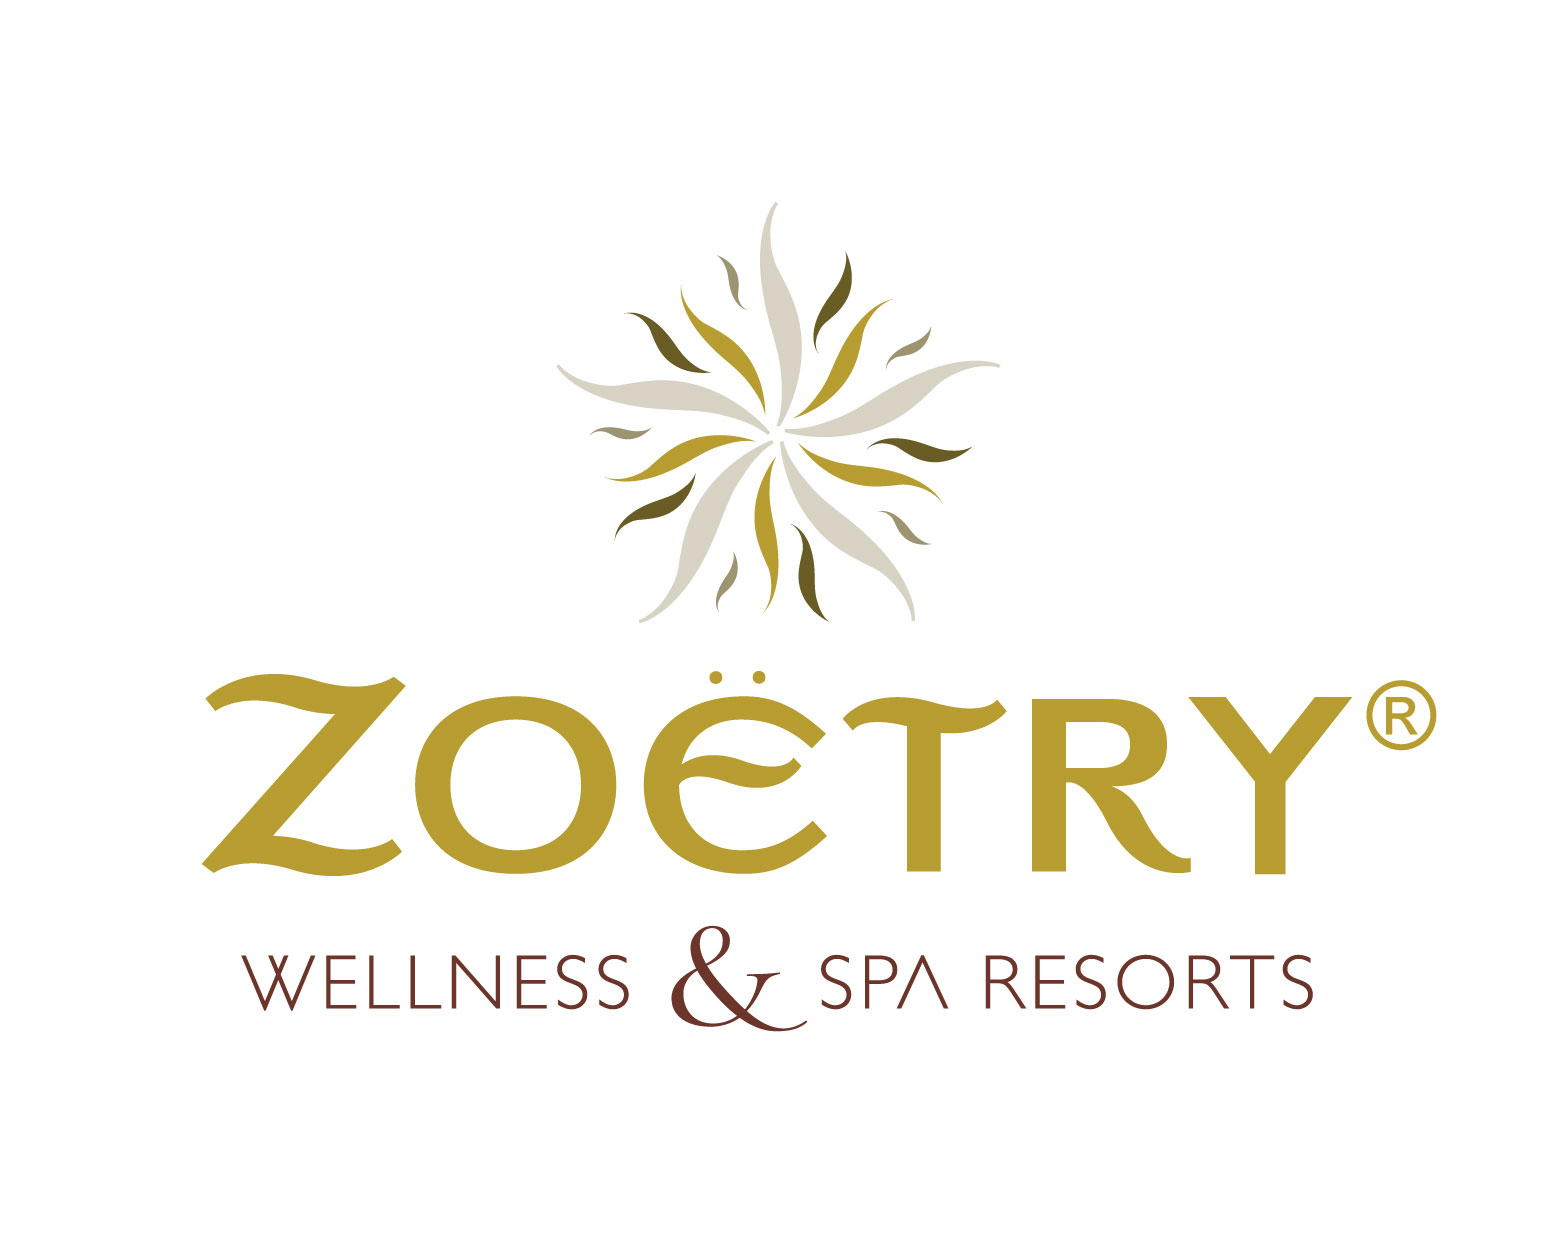 Zoetry Wellness and Spa resorts